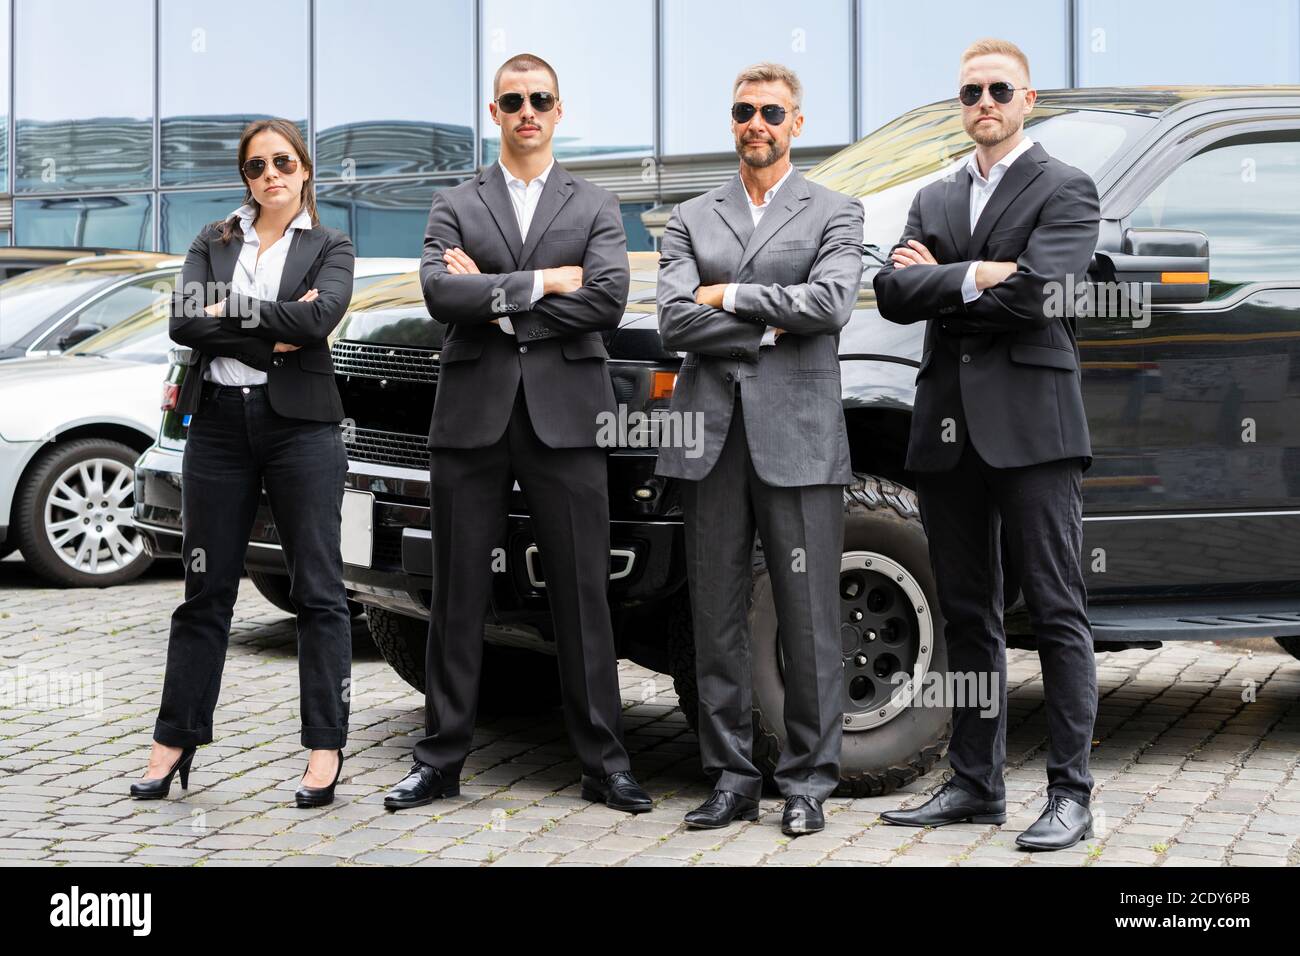 Business Security Guard Service At Work Near Luxury Car Stock Photo